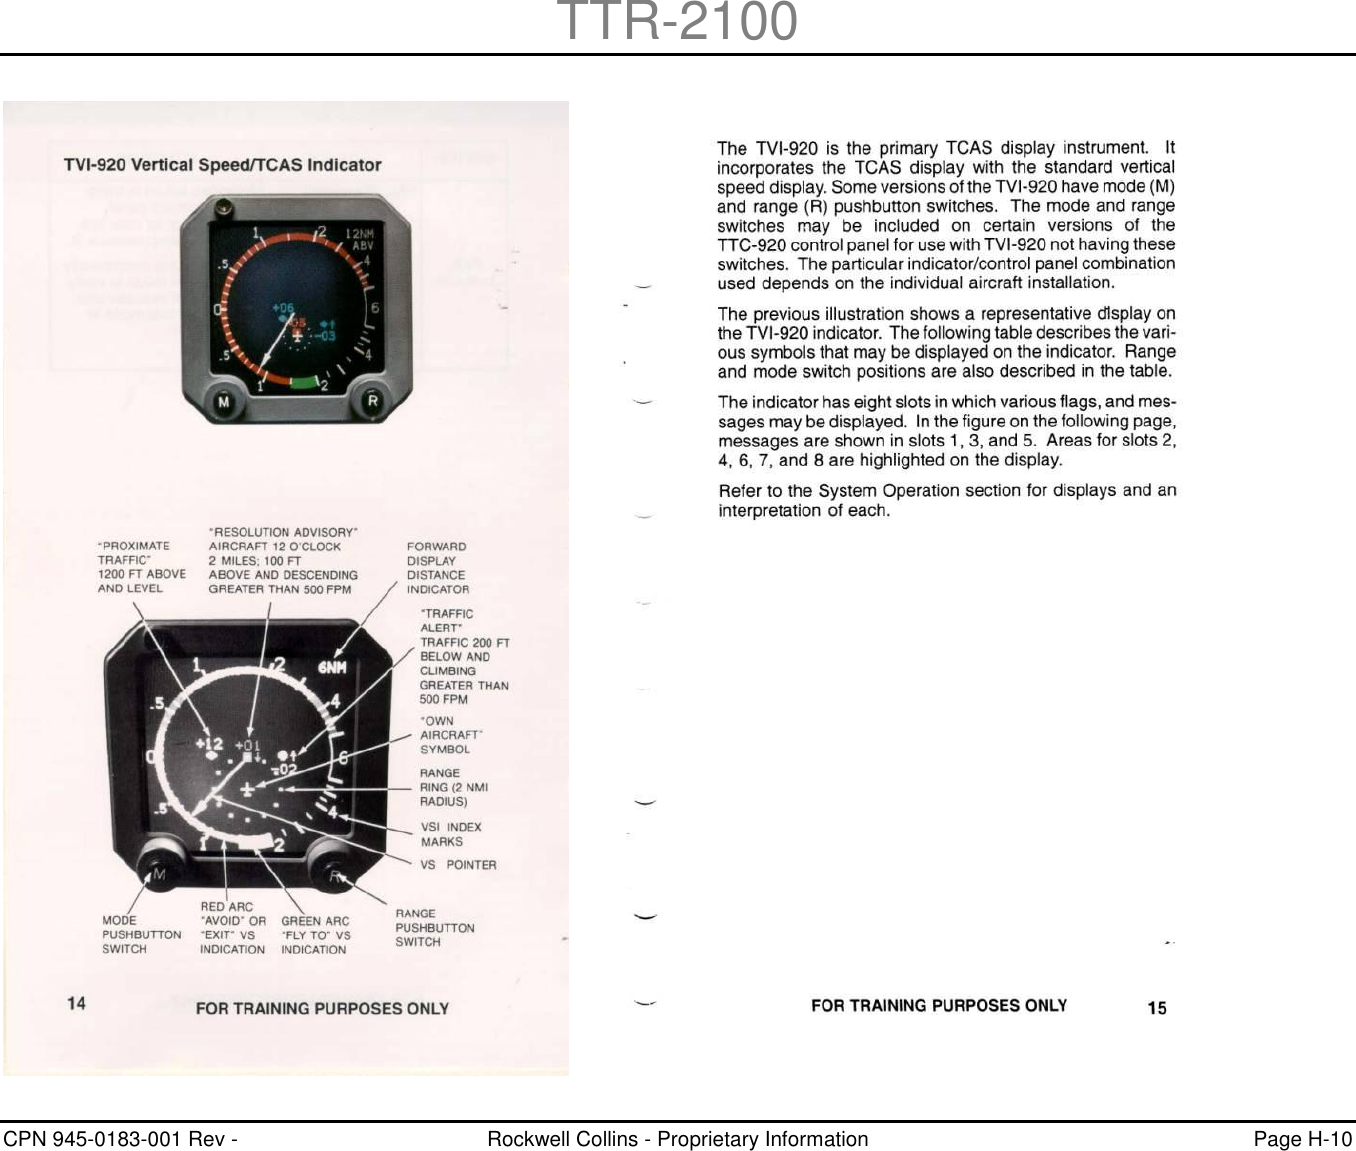 TTR-2100 CPN 945-0183-001 Rev -  Rockwell Collins - Proprietary Information  Page H-10    